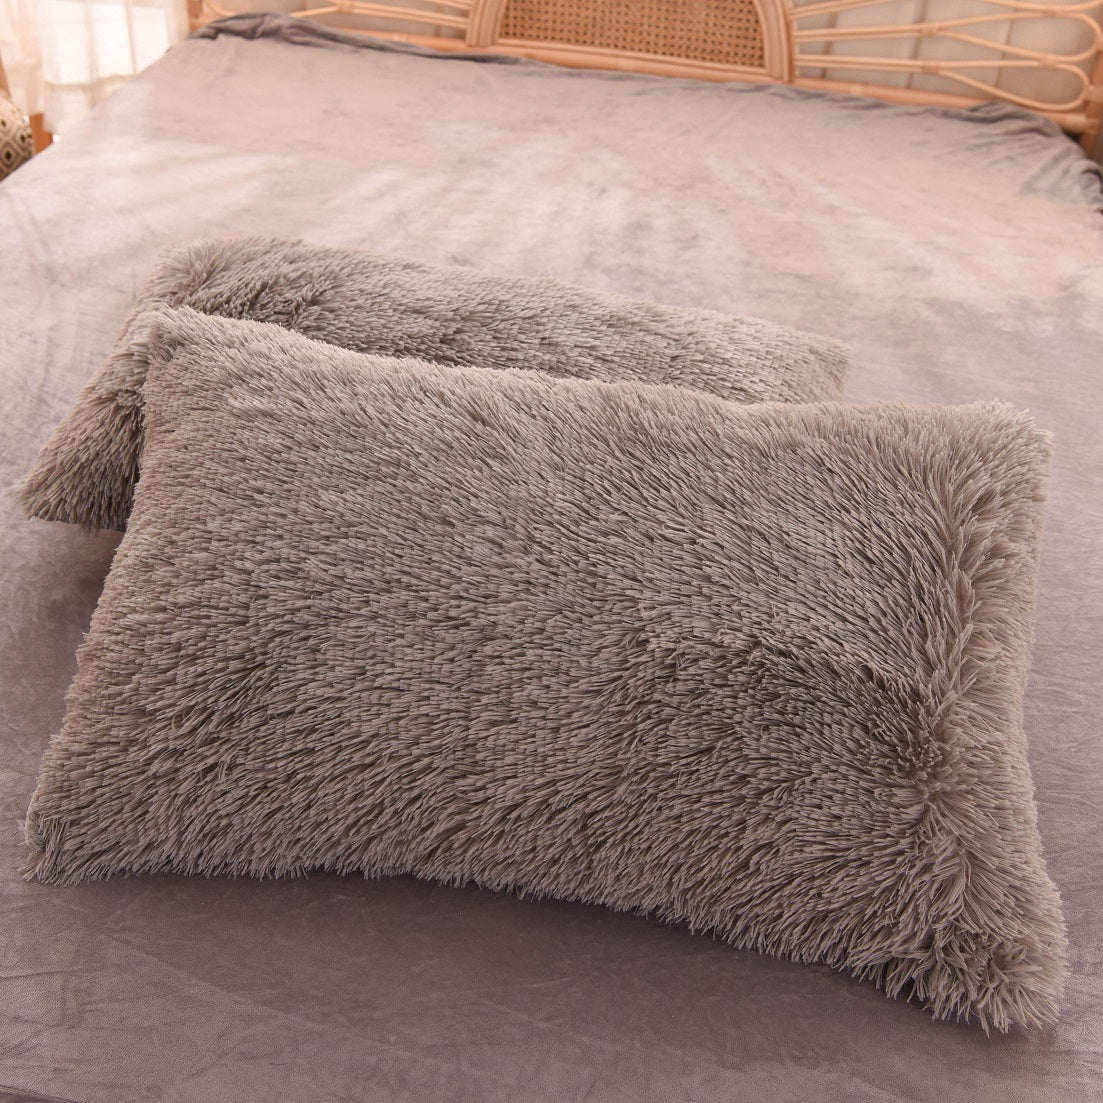 Plush Grey Duvet Cover Set With 2 Pillow Cases